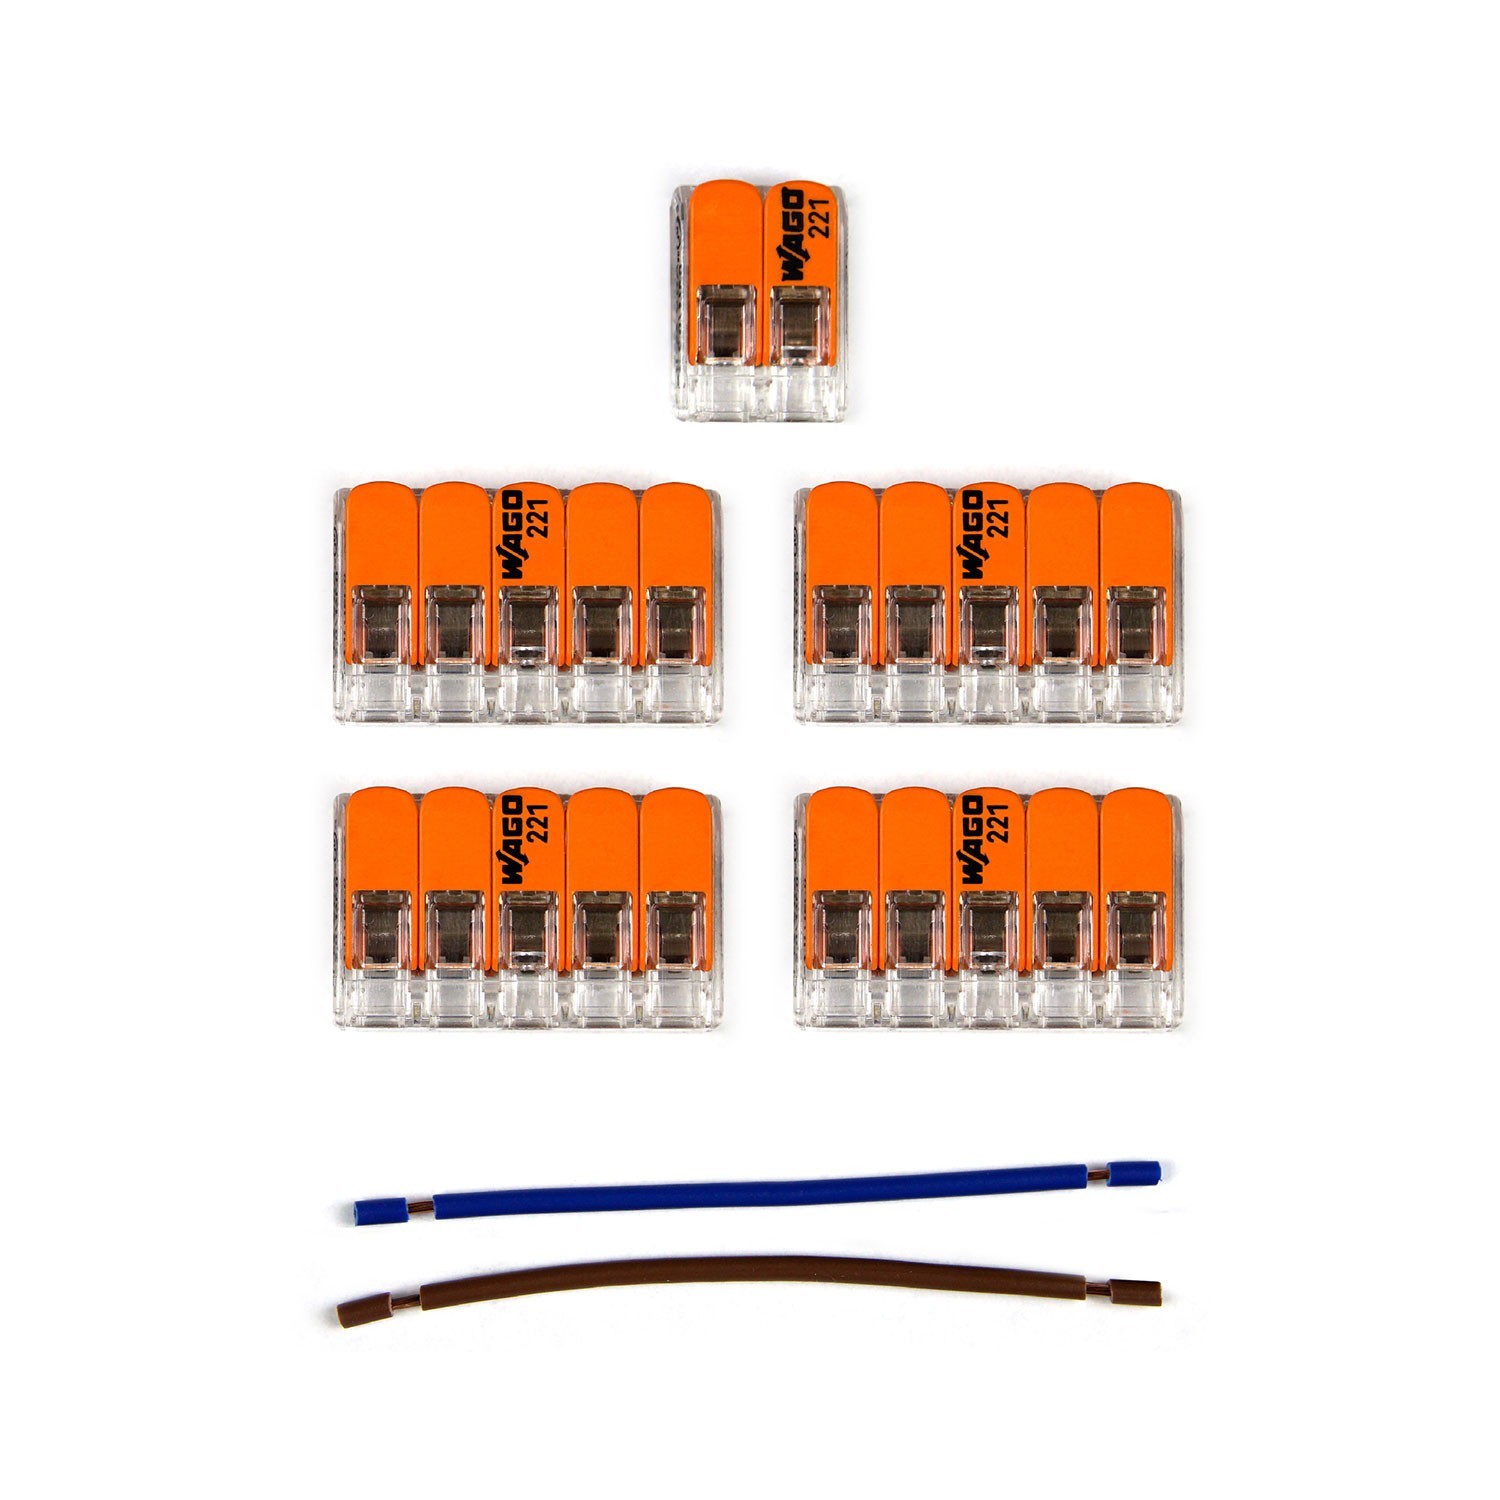 WAGO connector kit compatible with 2x cable for 7 hole ceiling rose